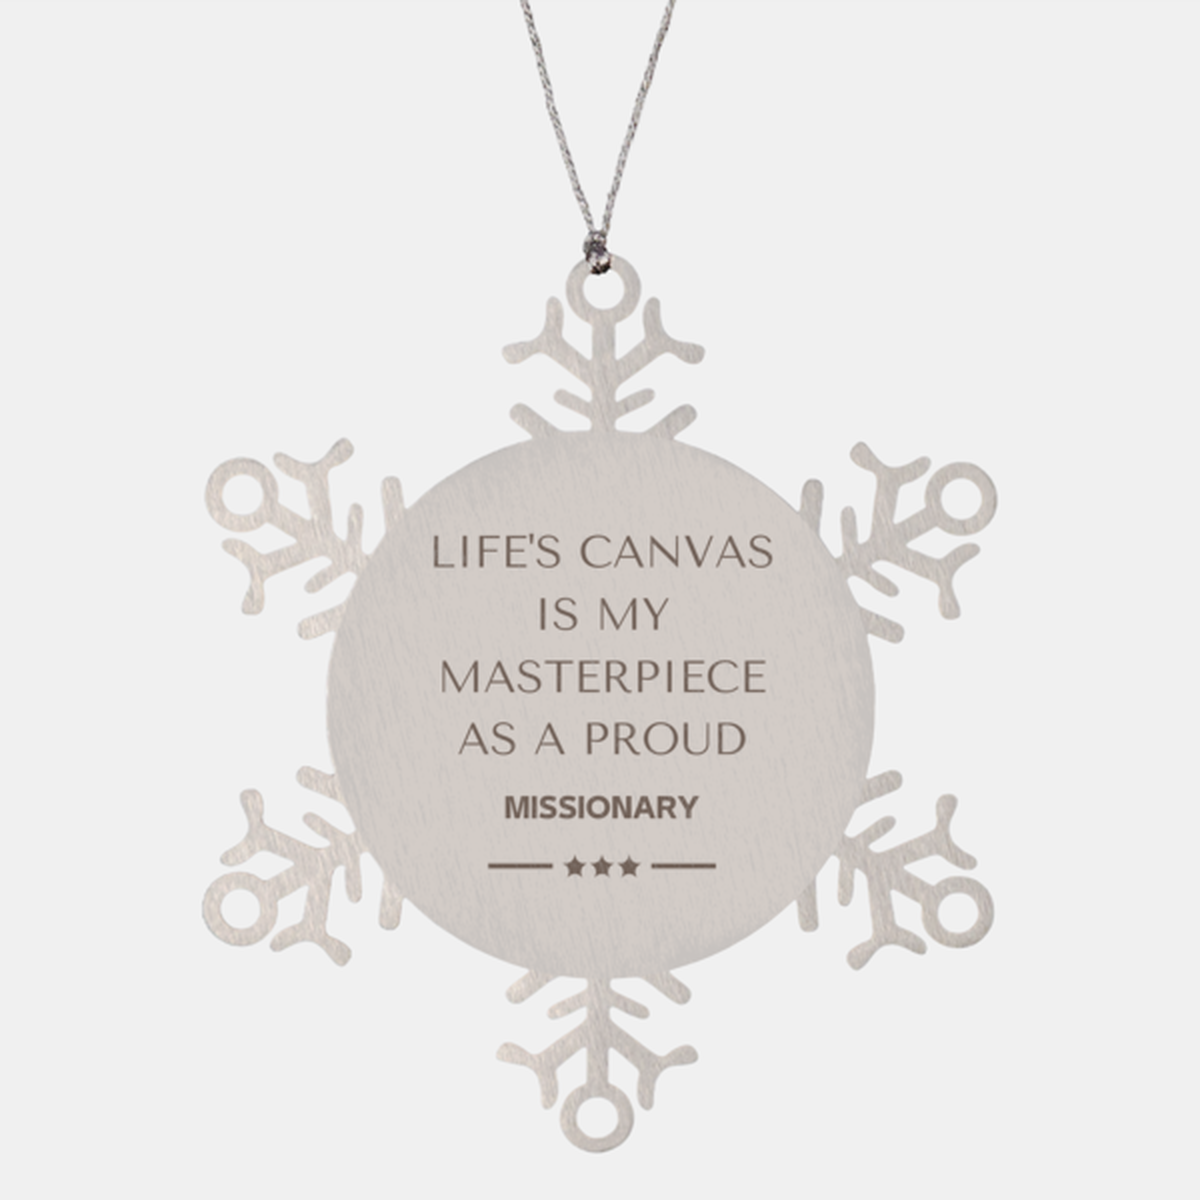 Proud Missionary Gifts, Life's canvas is my masterpiece, Epic Birthday Christmas Unique Snowflake Ornament For Missionary, Coworkers, Men, Women, Friends